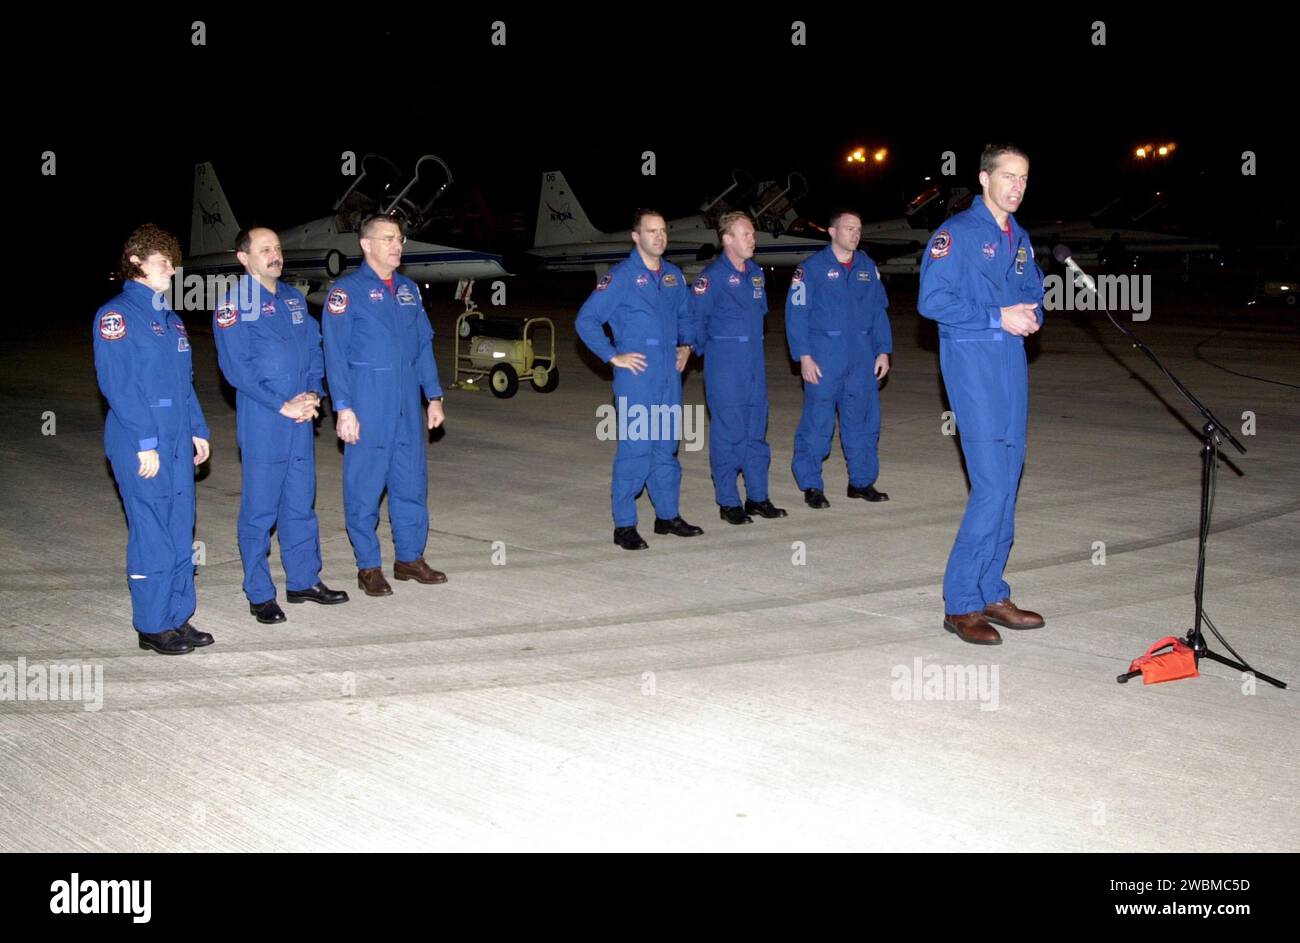 After landing at KSC’s Shuttle Landing Facility, the STS-102 crew pause to brief the media. At the microphone is Commander James Wetherbee. Standing behind him (left to right) are Missions Specialists Susan Helms, Yury Usachev and James Voss, who are also the Expedition Two crew due to replace Expedition One on the International Space Station; Mission Specialists Paul Richards and Andrew Thomas; and Pilot James Kelly. STS-102 will be carrying the Multi-Purpose Logistics Module Leonardo, the primary delivery system used to resupply and return Station cargo requiring a pressurized environment. L Stock Photo